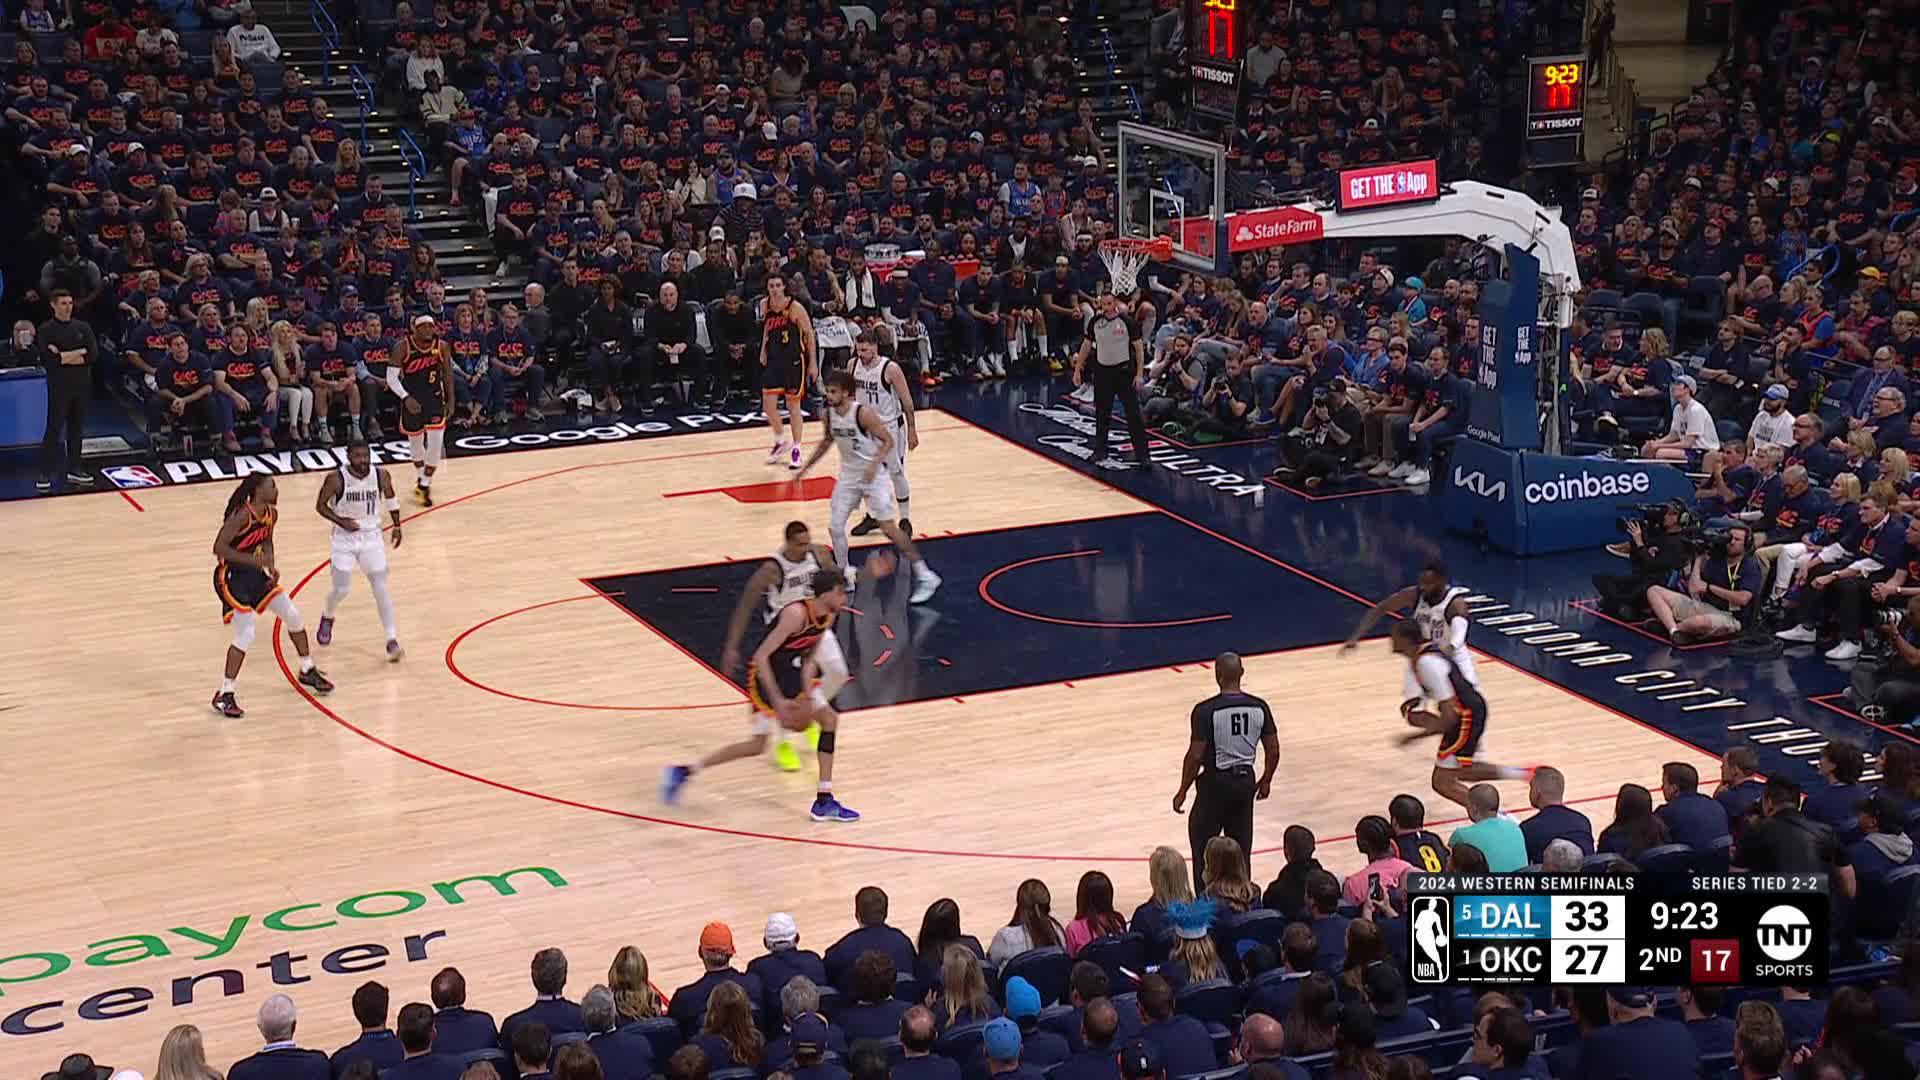 Luka Full-Court Lob to Lively 😱